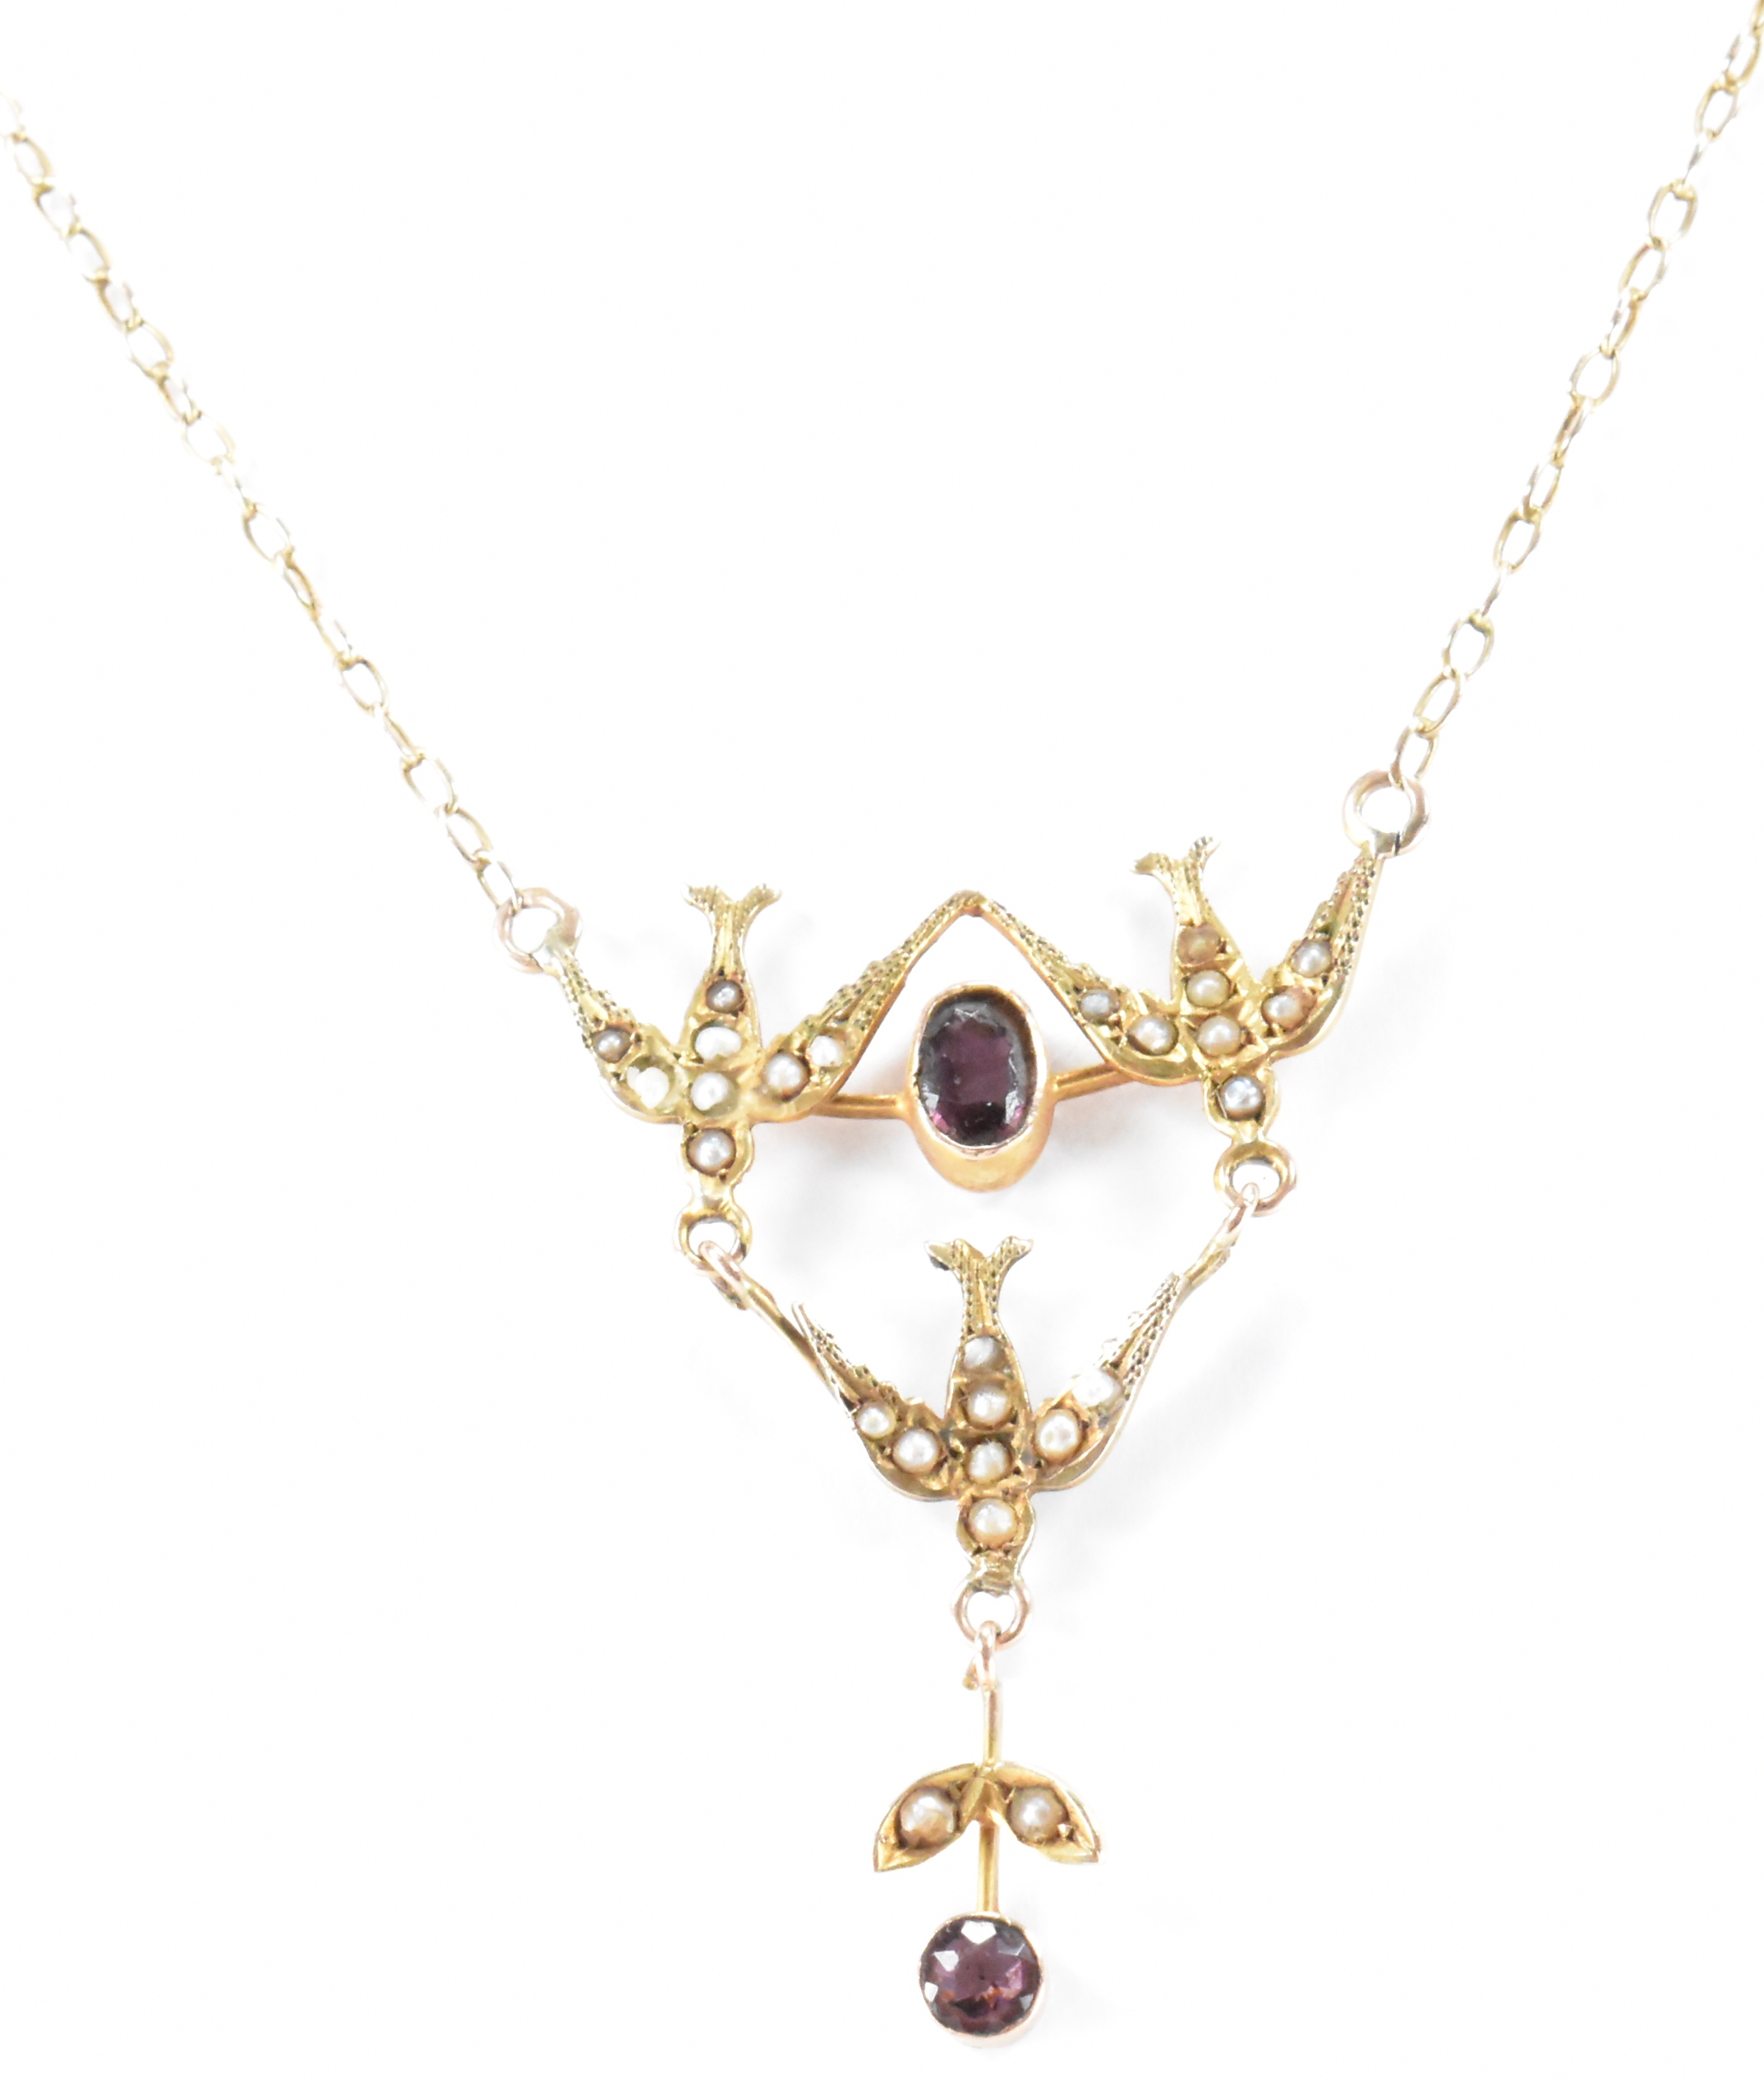 VICTORIAN GOLD SEEDPEARL & PASTE SWALLOW NECKLACE - Image 2 of 9